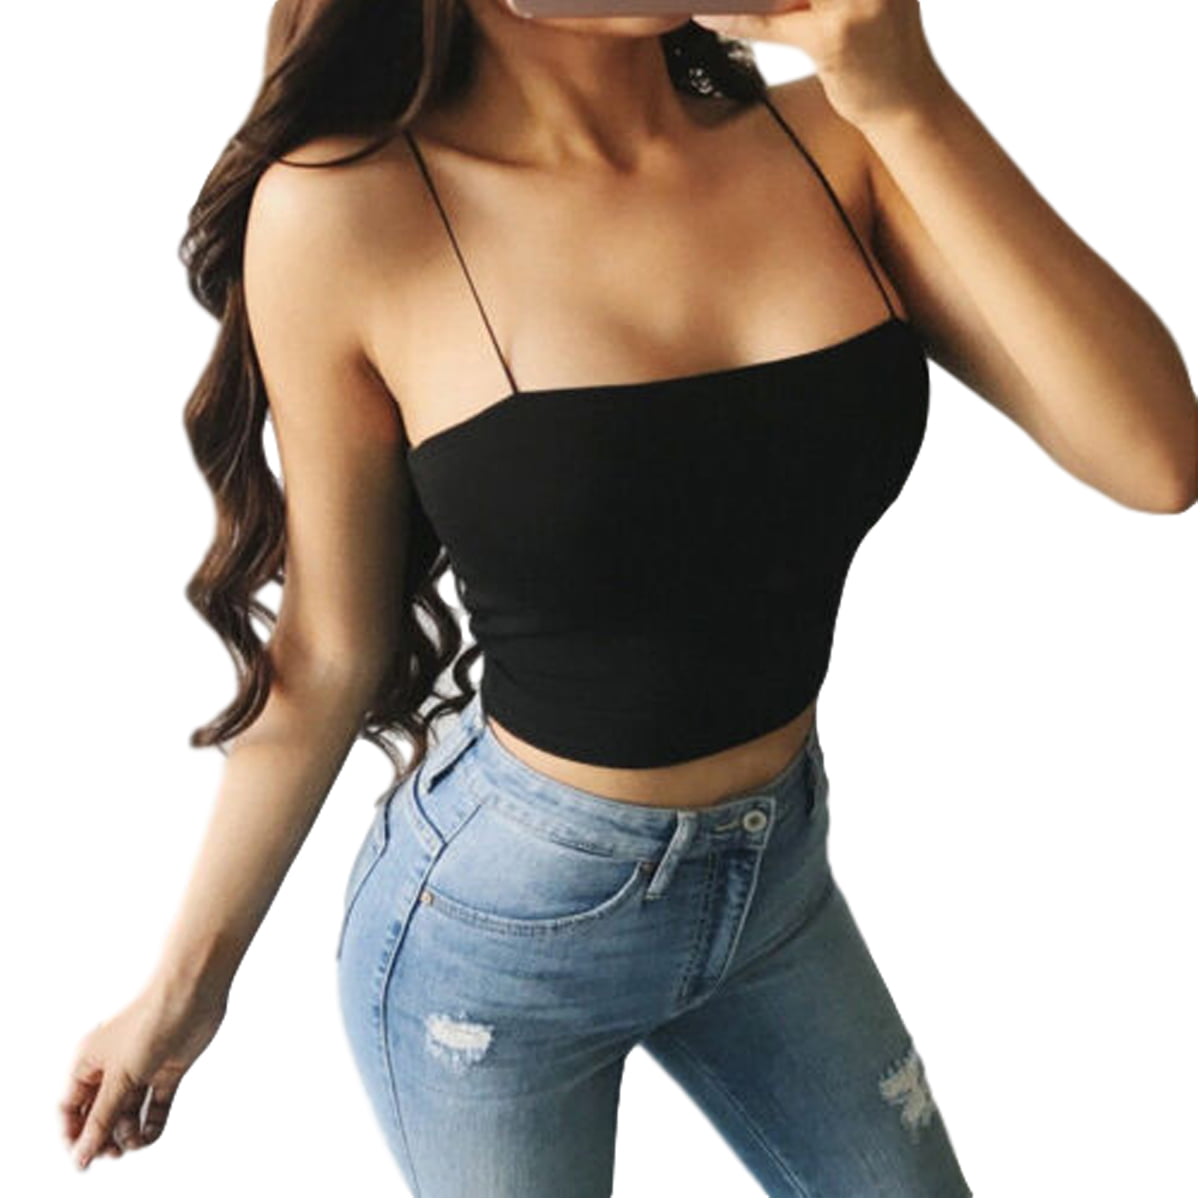 TUBE CAMI CROP TOP 6 COLORS BLACK WHITE PINK GREY GREEN RED SEE DESCRIPTION#HOT